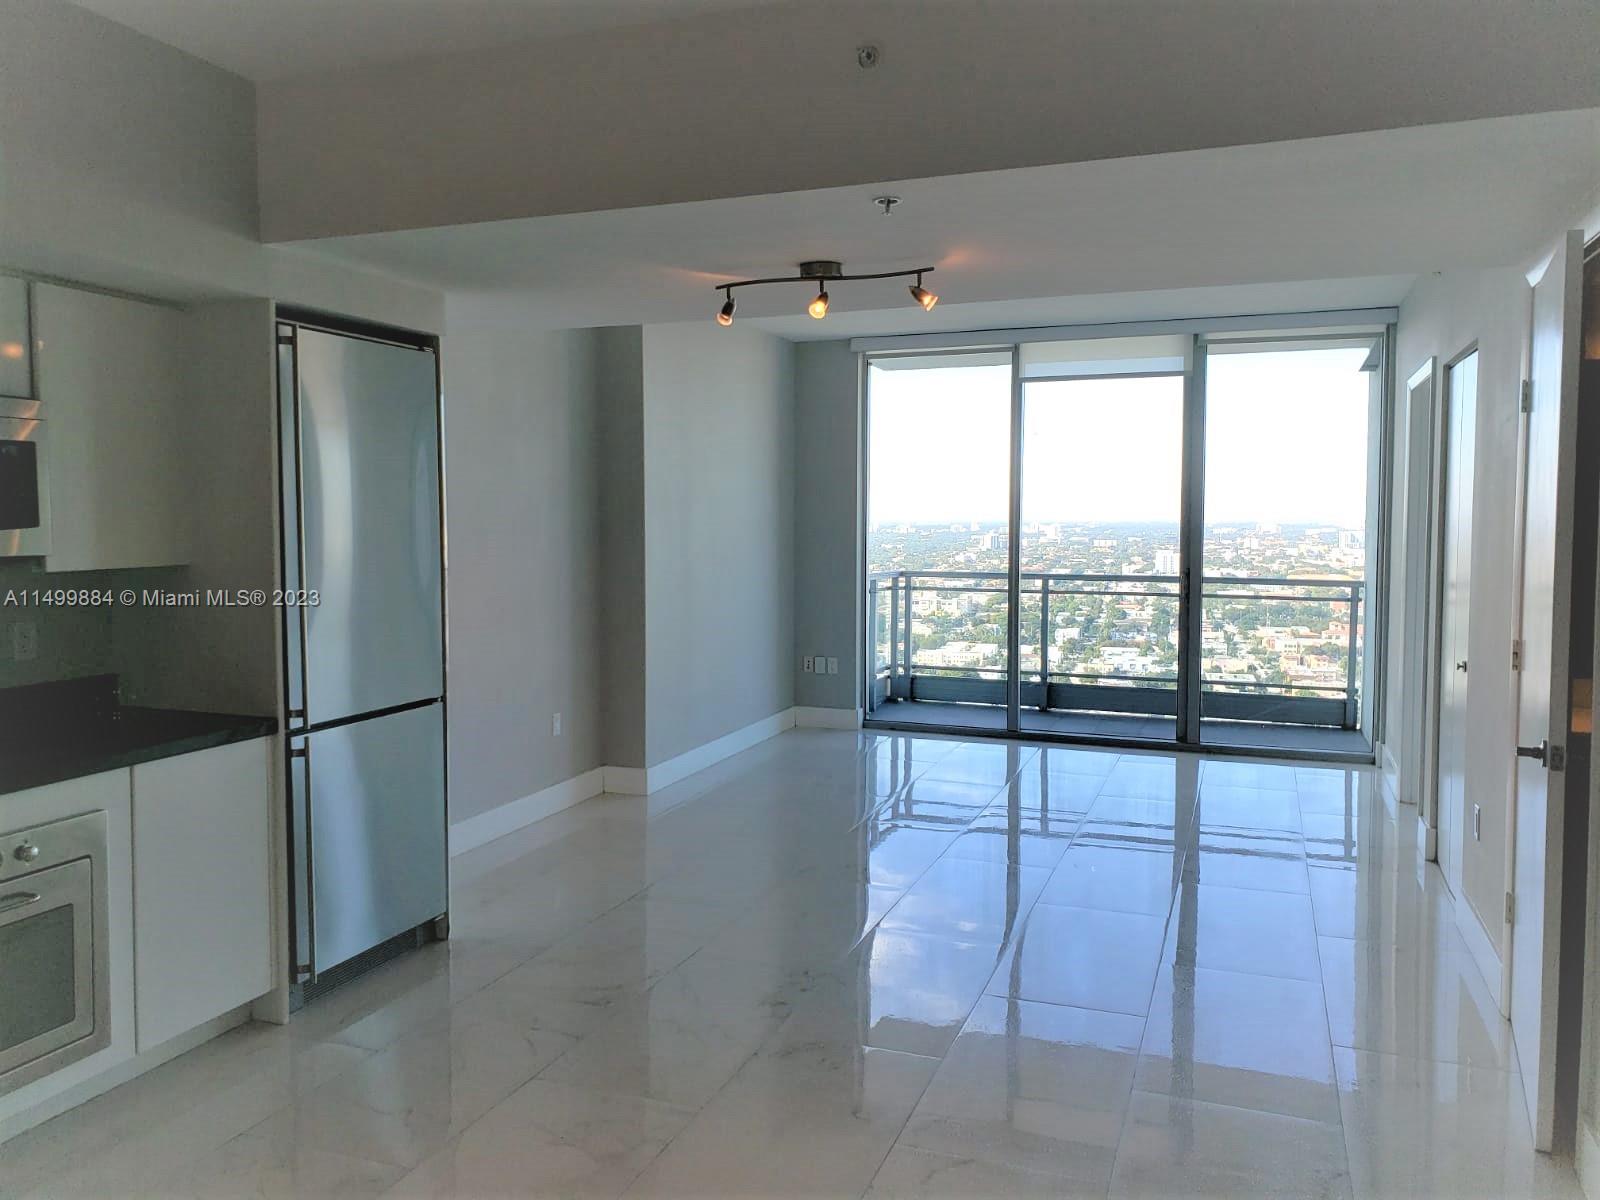 Very Nice Apartment Located at Mint Condominium Building in Brickell/River Front Area, Walking Distance to Mary Brickell Village and Brickell Citi Centre. 1 Bedroom, 1 Full Bath, Open Floor Plan with Beautiful Ceramic Floors. Top of the Line Italian Cabinets and Appliances. Balcony Has Expansive City and River Views. Full Amenities Such as 24-Hour Security, Concierge, Gym/sauna, Valet